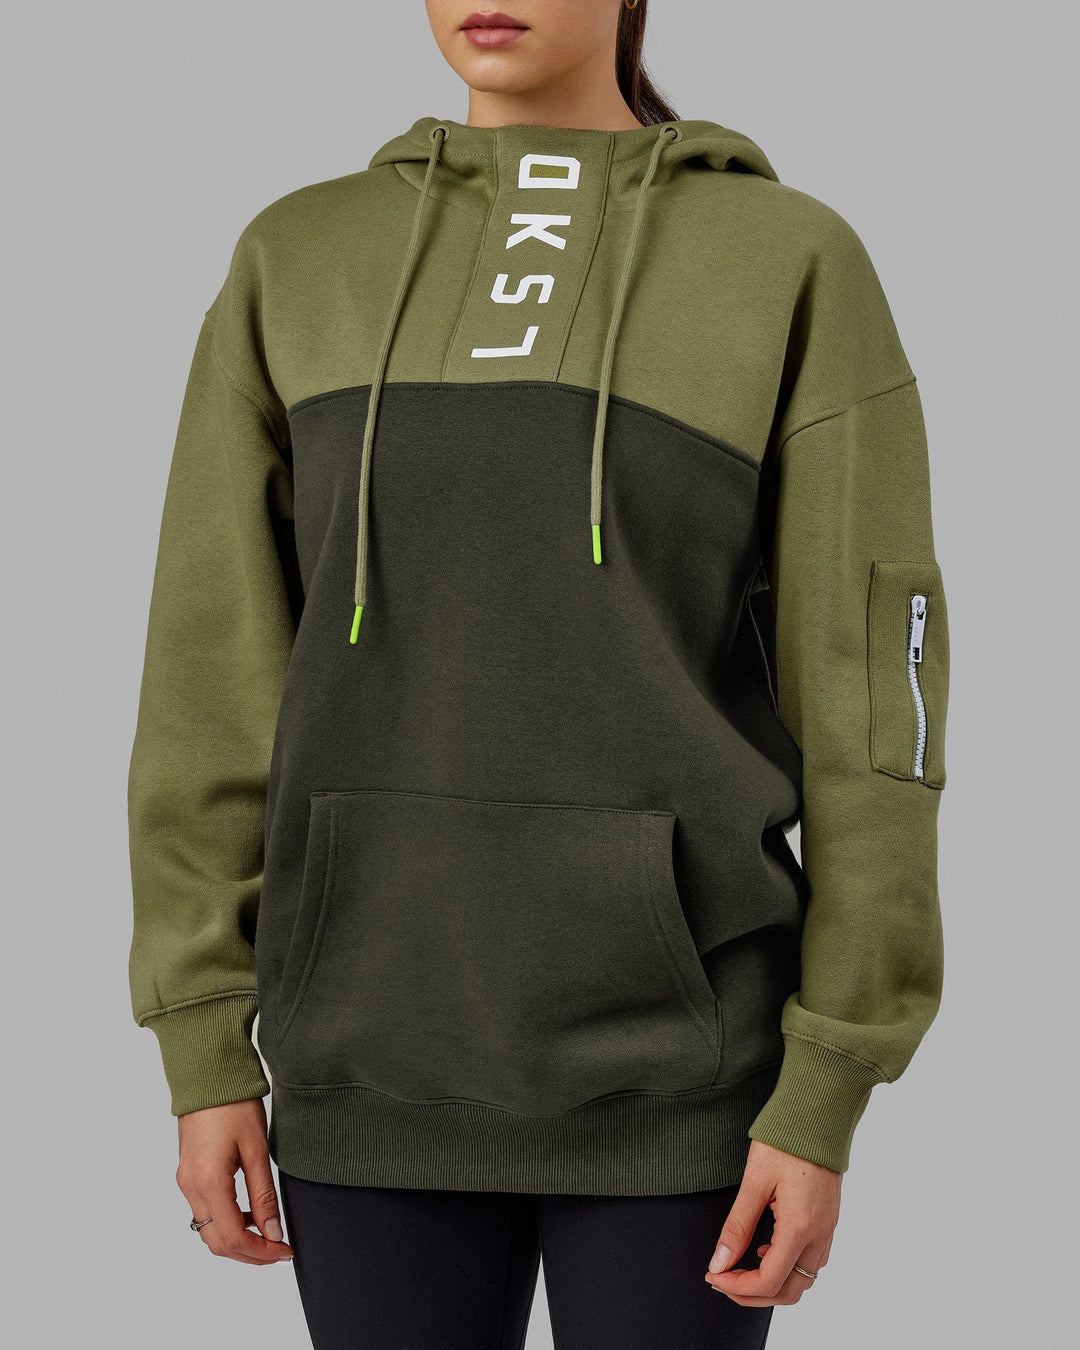 Woman wearing Unisex Contrary Hoodie Oversize - Forest Night-Moss Stone